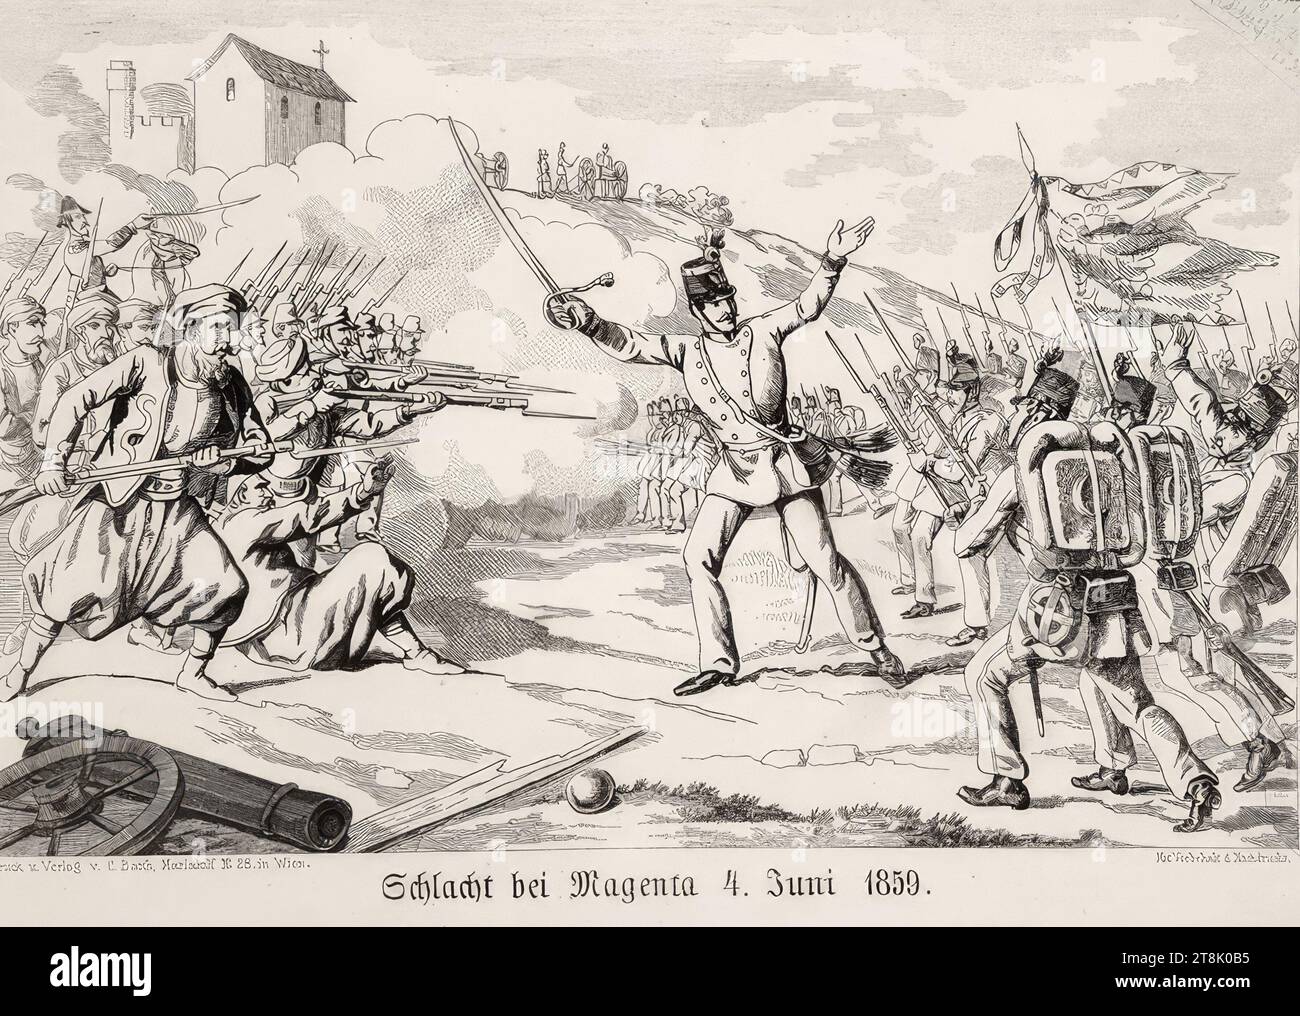 Battle of Magenta June 4, 1859.', around 1860, print, etching on paper, sheet: 21.2 × 31.3 cm, long stamp ''LIBRARY, OF THE K.K., MINISTRY OF POLICE', recto, Round stamp 'LIBRARY OF THE K.K. MINISTER COUNCIL PRESIDIUM', recto, [r.r.] 'With reservation d. Reprint', below the illustration Stock Photo